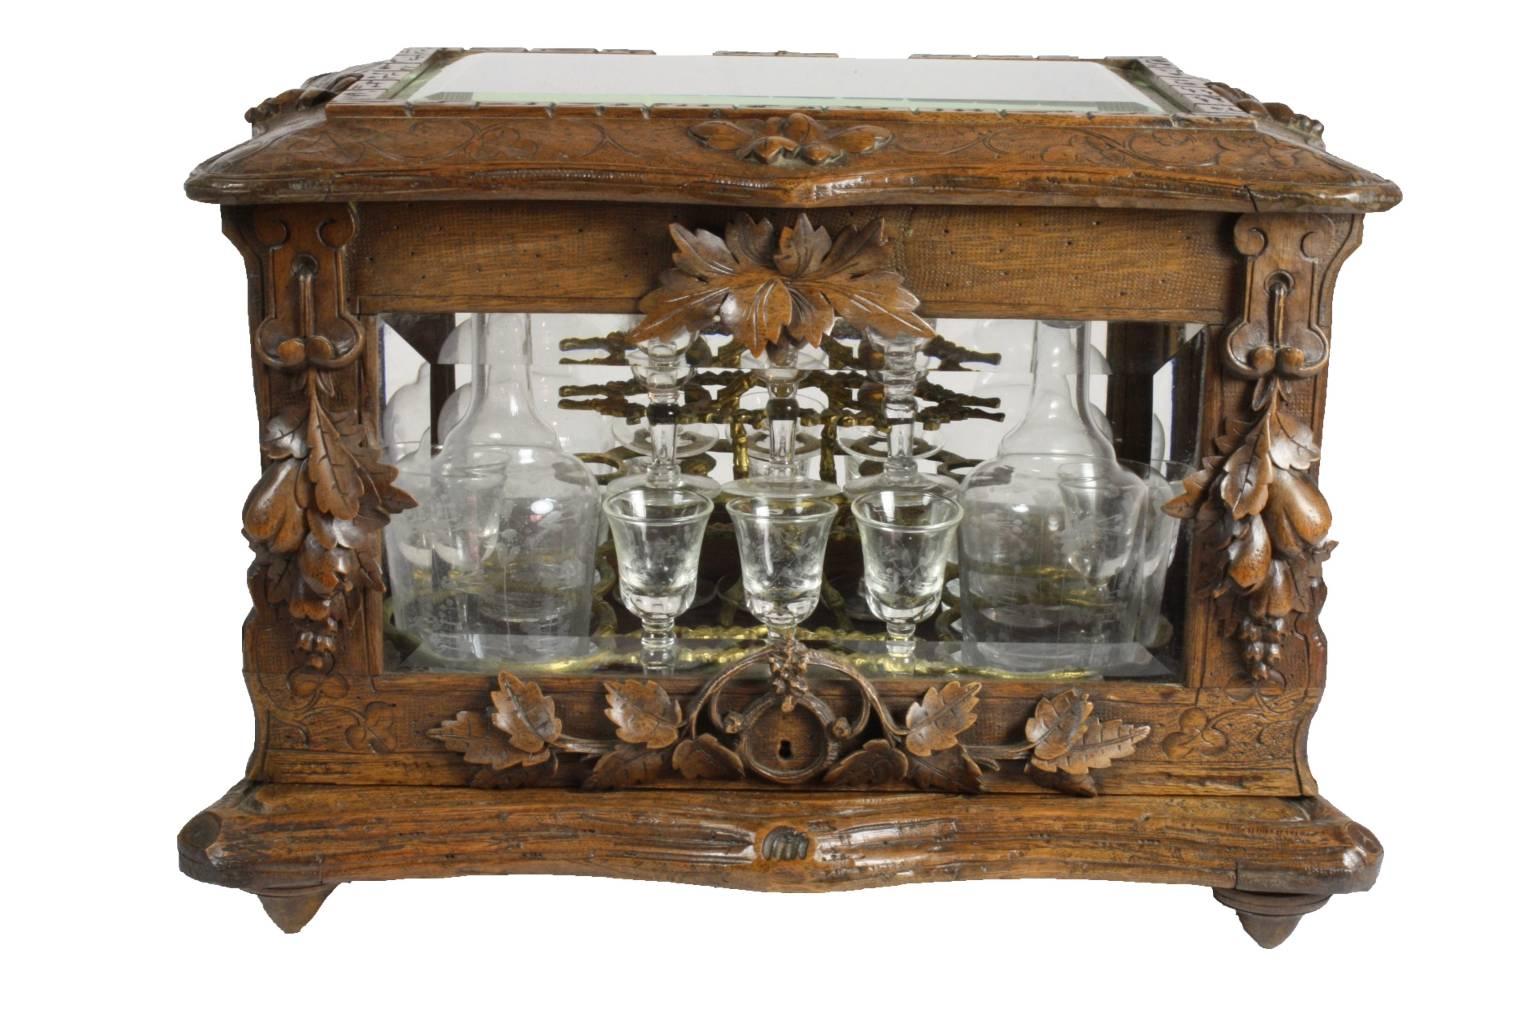 Carved walnut and beveled glass panels in the surround, hold a removable base with four etched decanters and 16 etched cordial glasses held by decorative brass and handle.